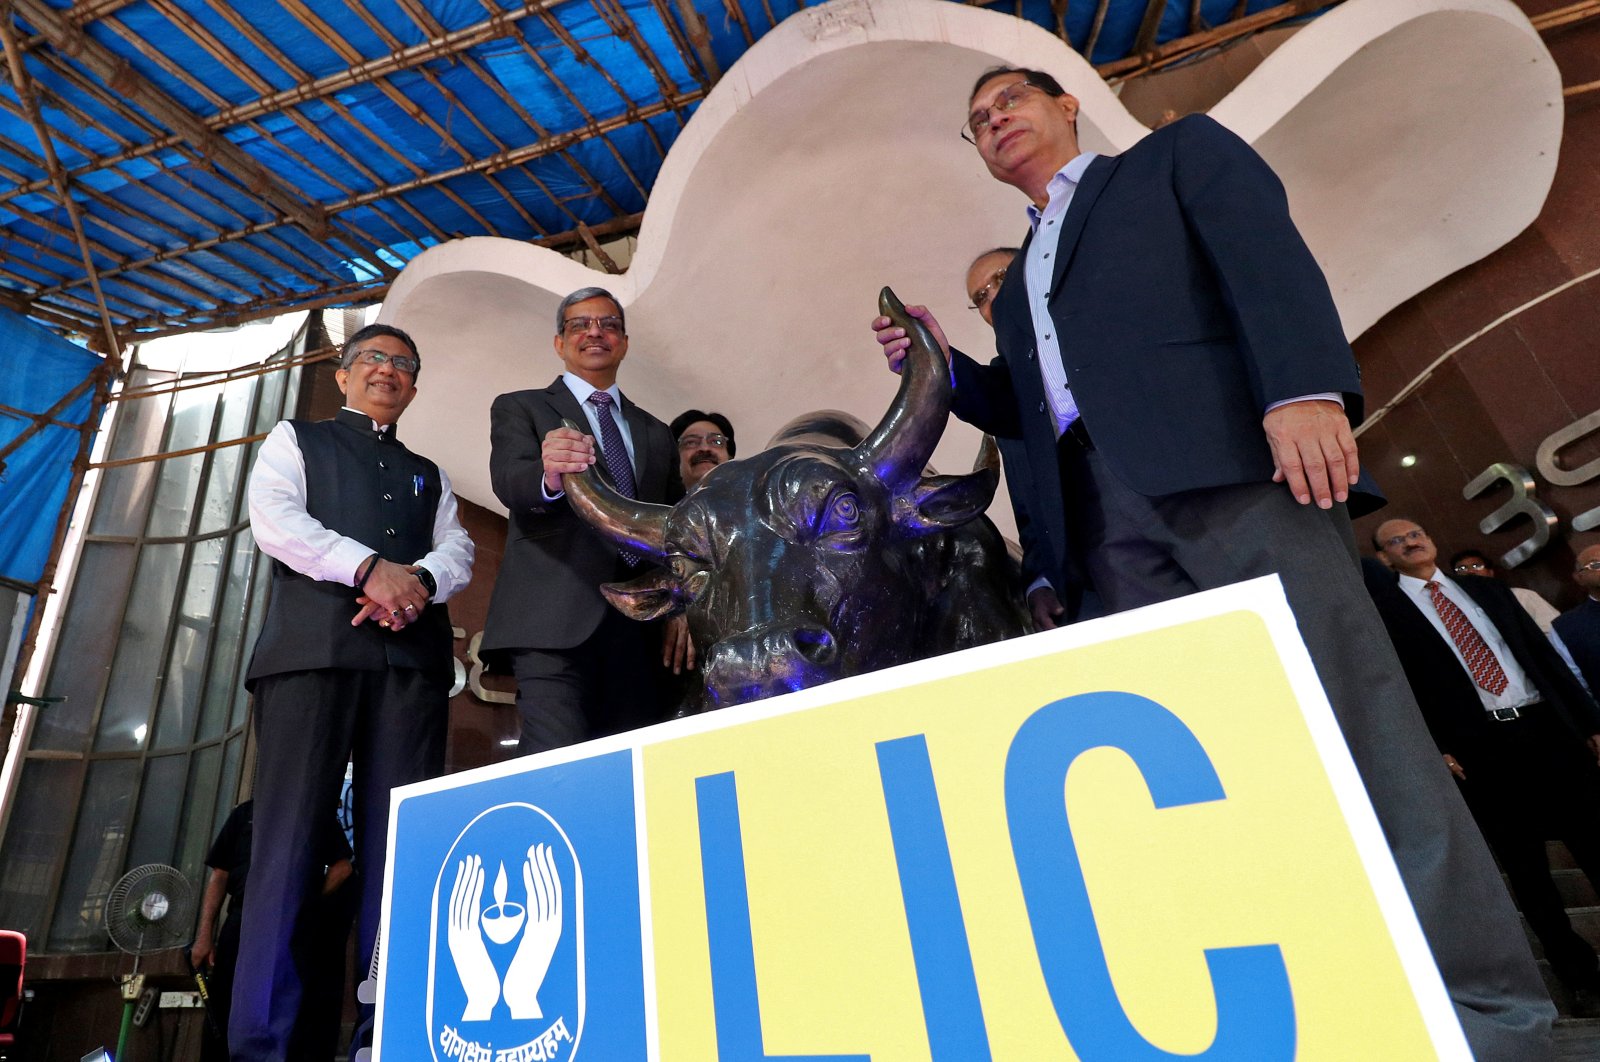 From left to right, Ashishkumar Chauhan, managing director and CEO of the Bombay Stock Exchange (BSE), Life Insurance Corporation of India (LIC) Chairperson Mangalam Ramasubramanian Kumar and Tuhin Kanta Pandey, secretary of the Department of Investment and Public Asset Management (DIPAM), pose with a bronze replica of the Charging Bull of Wall Street, after the company&#039;s IPO listing ceremony at the Bombay Stock Exchange (BSE) in Mumbai, India, May 17, 2022. (Reuters Photo)